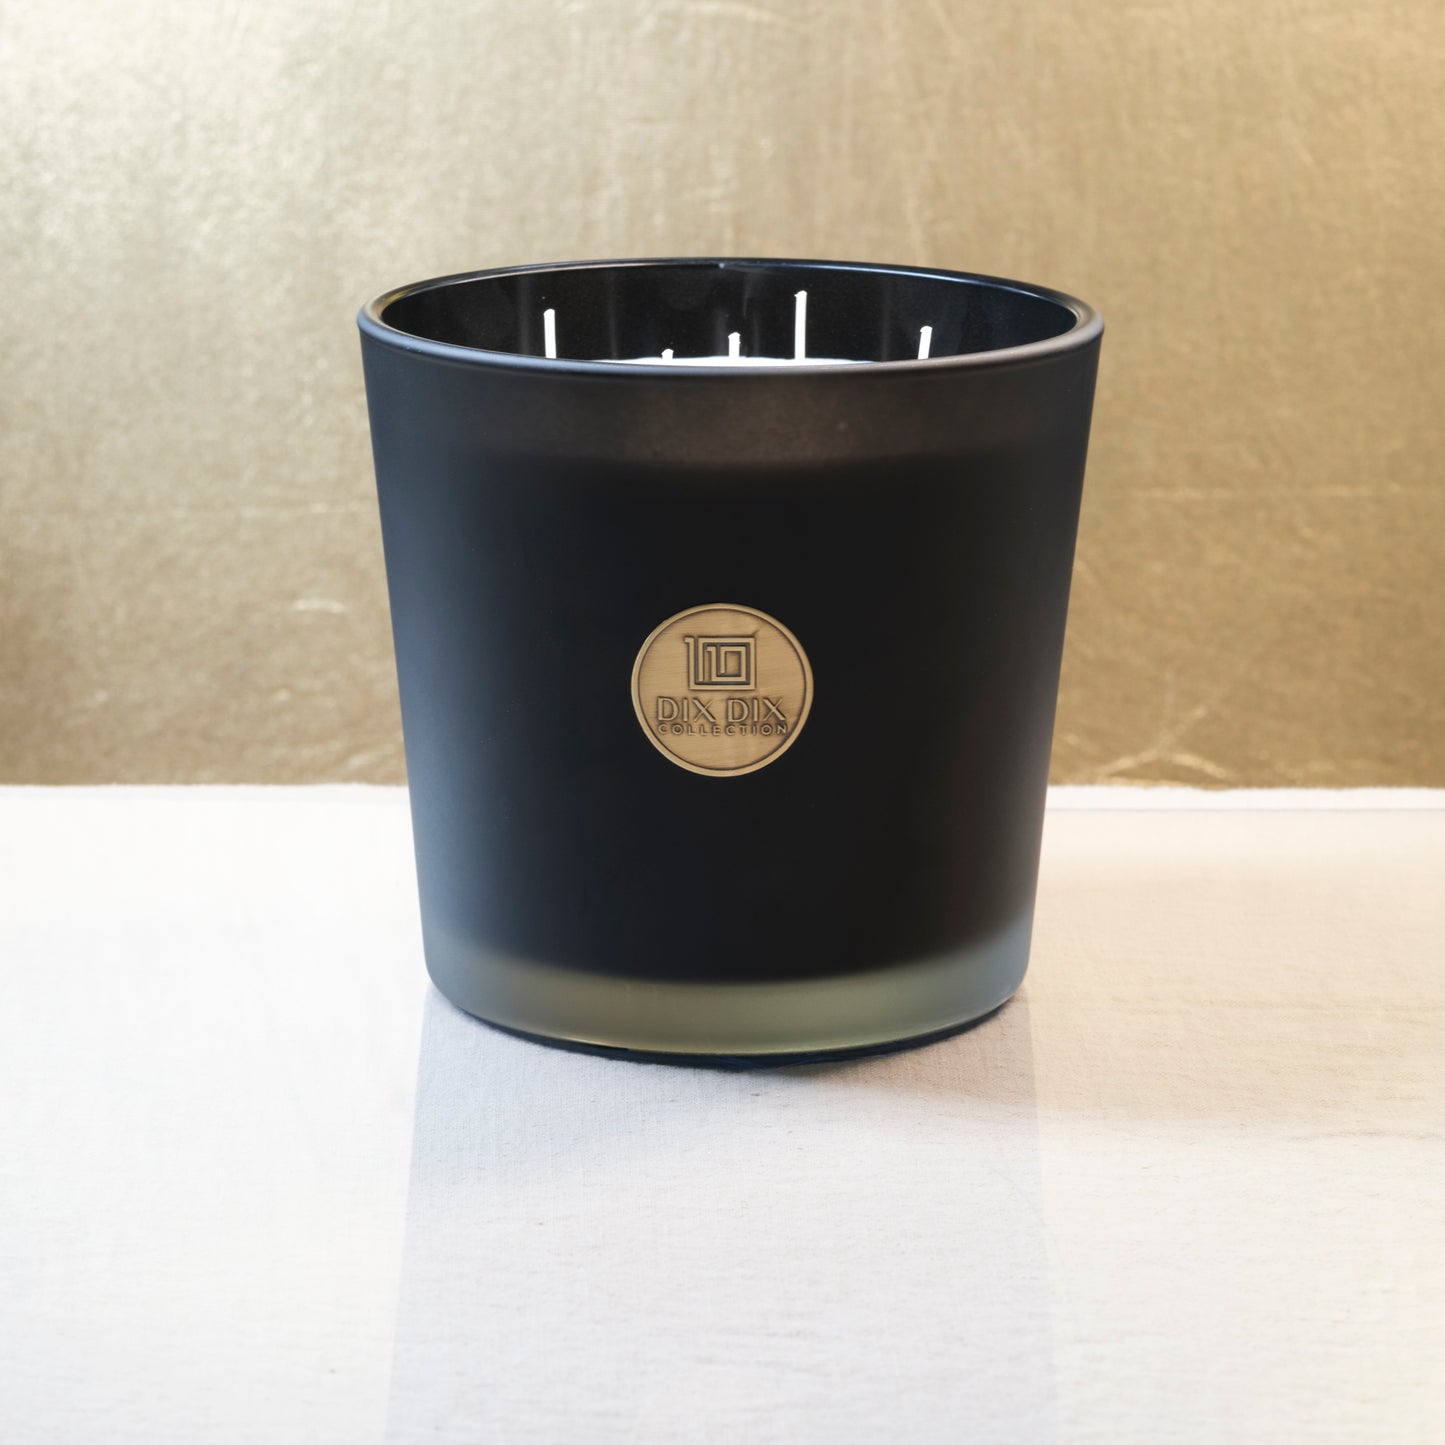 INTENSE - Scented candle 2200gr